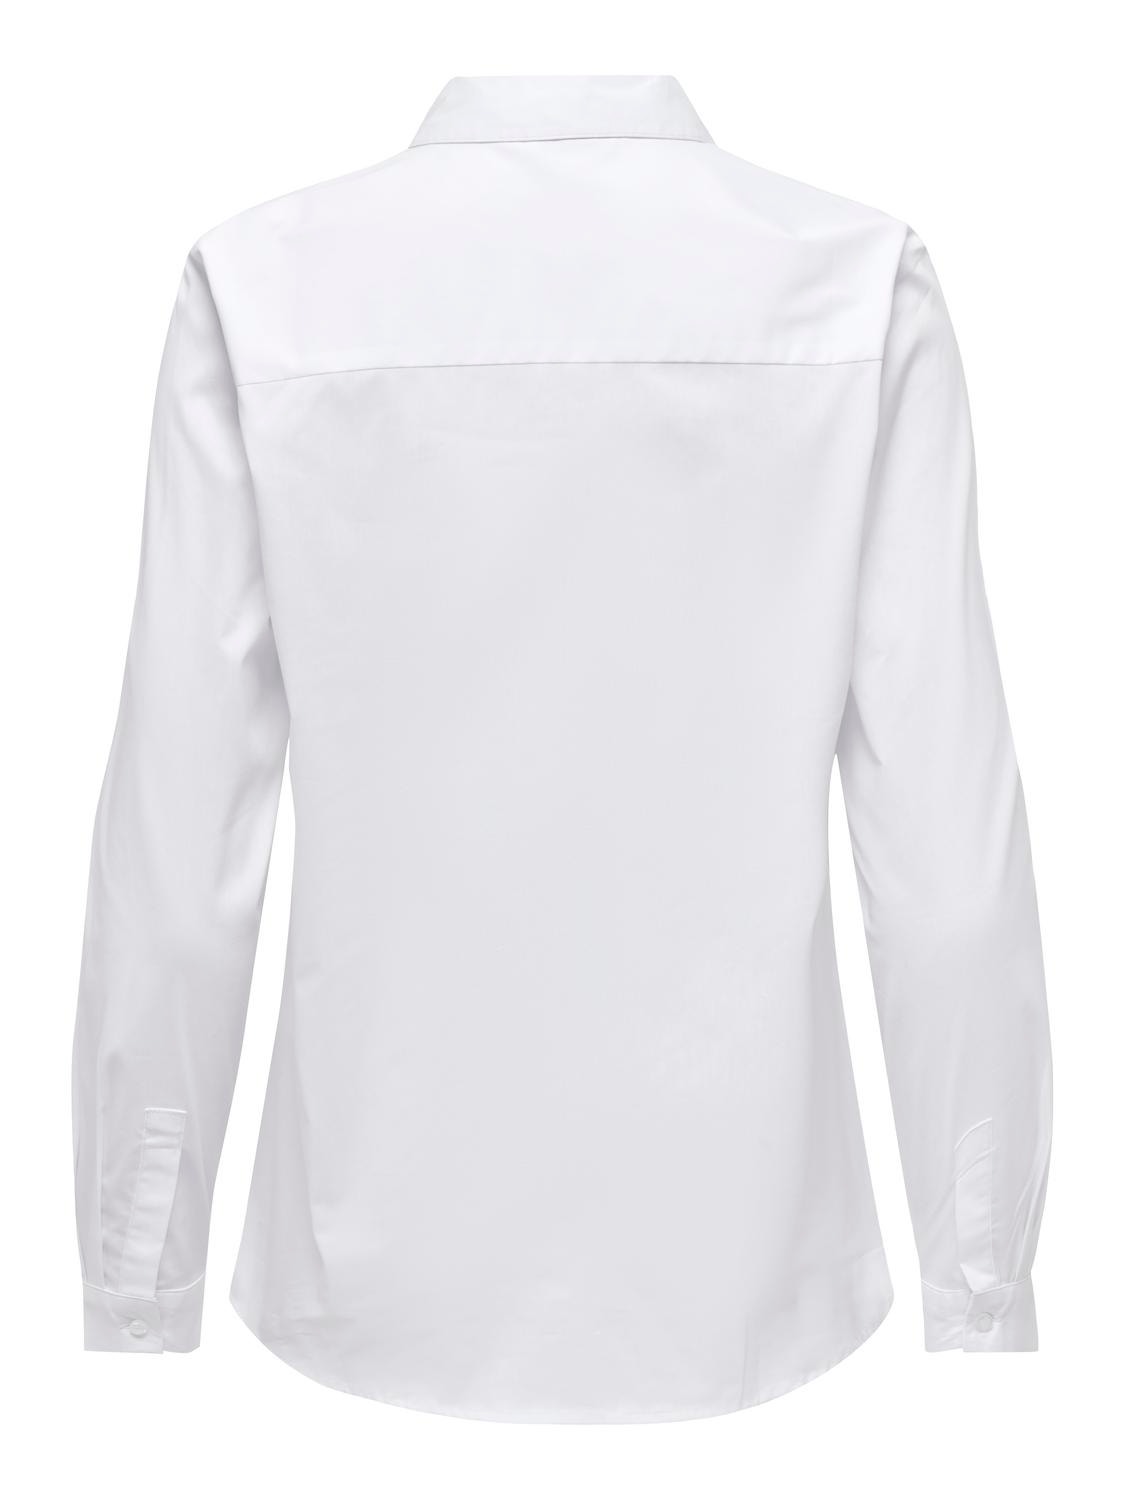 ONLY Regular Fit Shirt collar Buttoned cuffs Slim fitted sleeves Shirt -White - 15149877